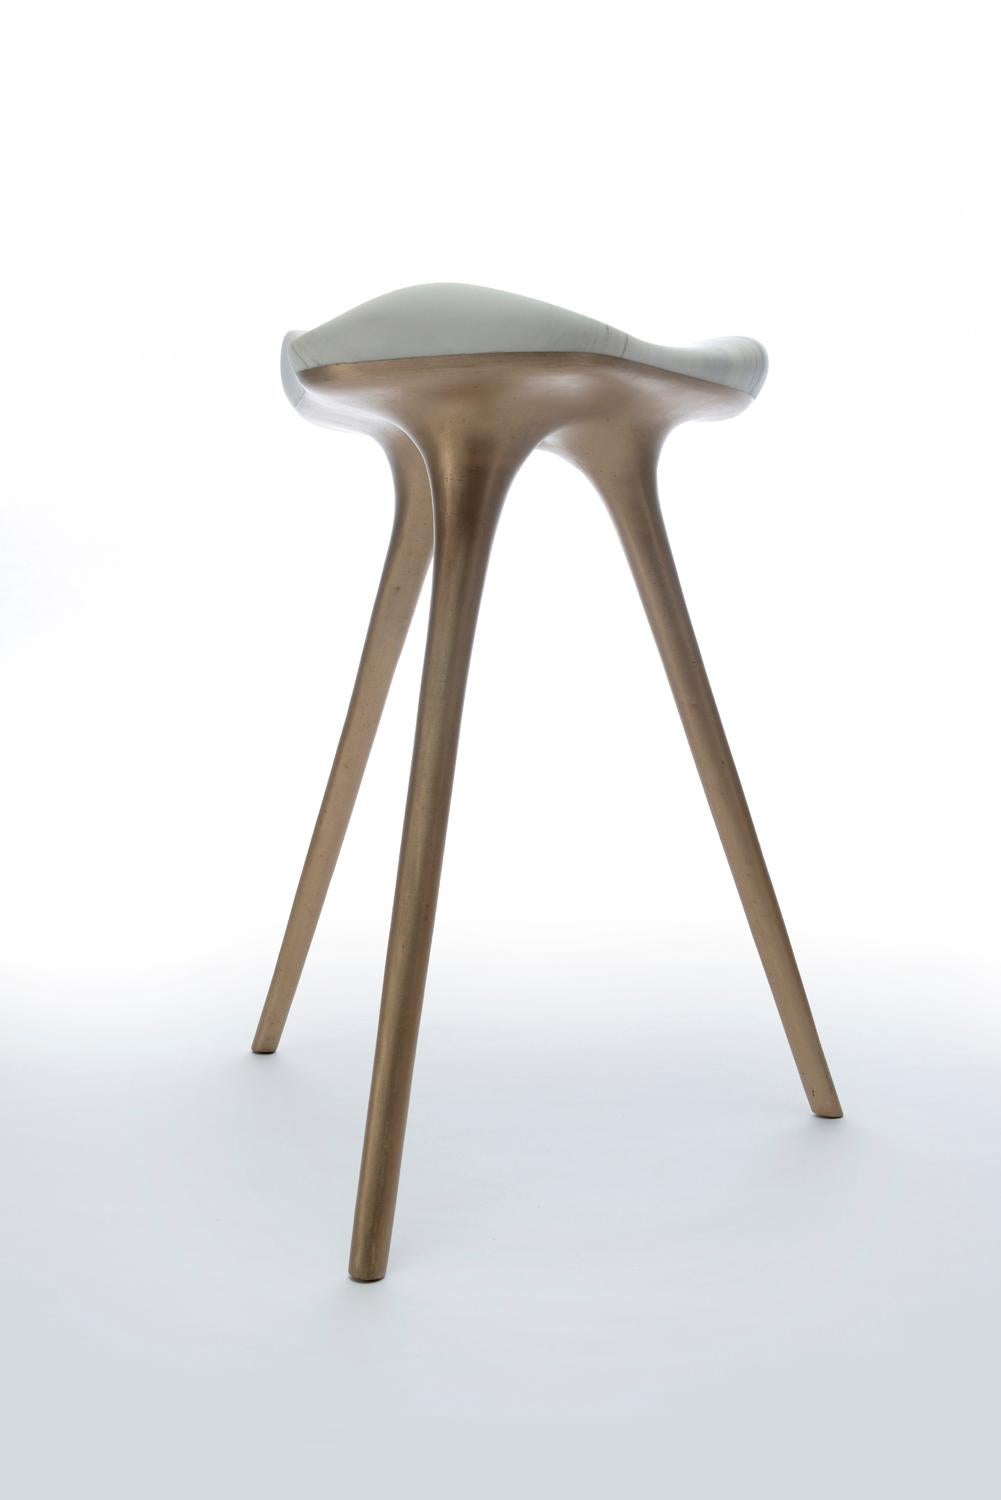 Nuvola Stool in Vermont Marble and Bronze by Stephen Shaheen In New Condition For Sale In Philadelphia, PA